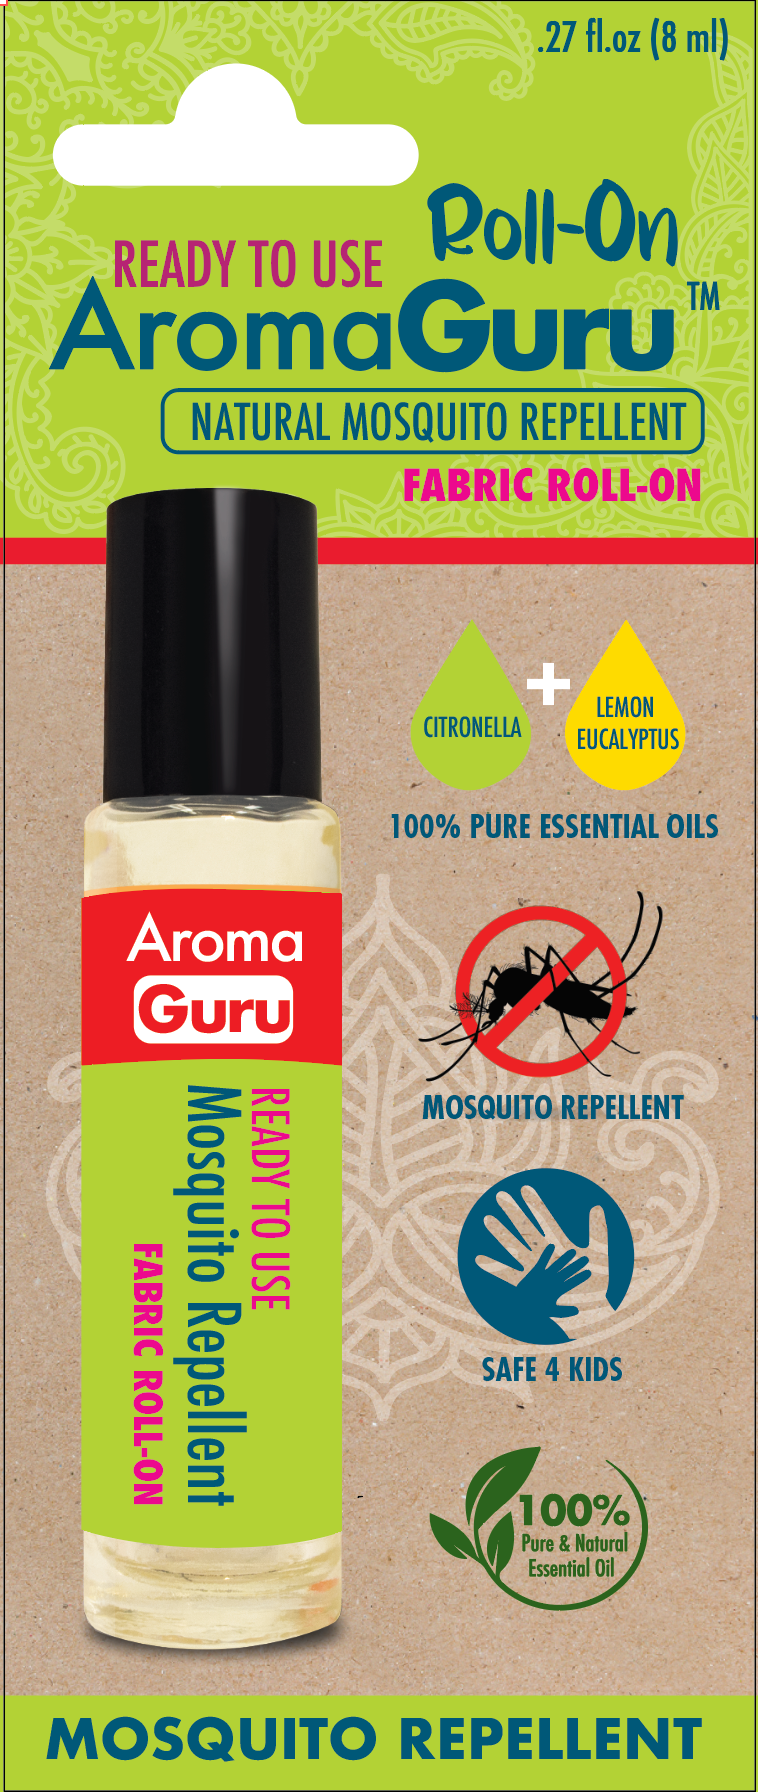 AromaGuru Mosquito Repellent Roll On (Pack of 18)- Wholesale Only, Contact to Purchase